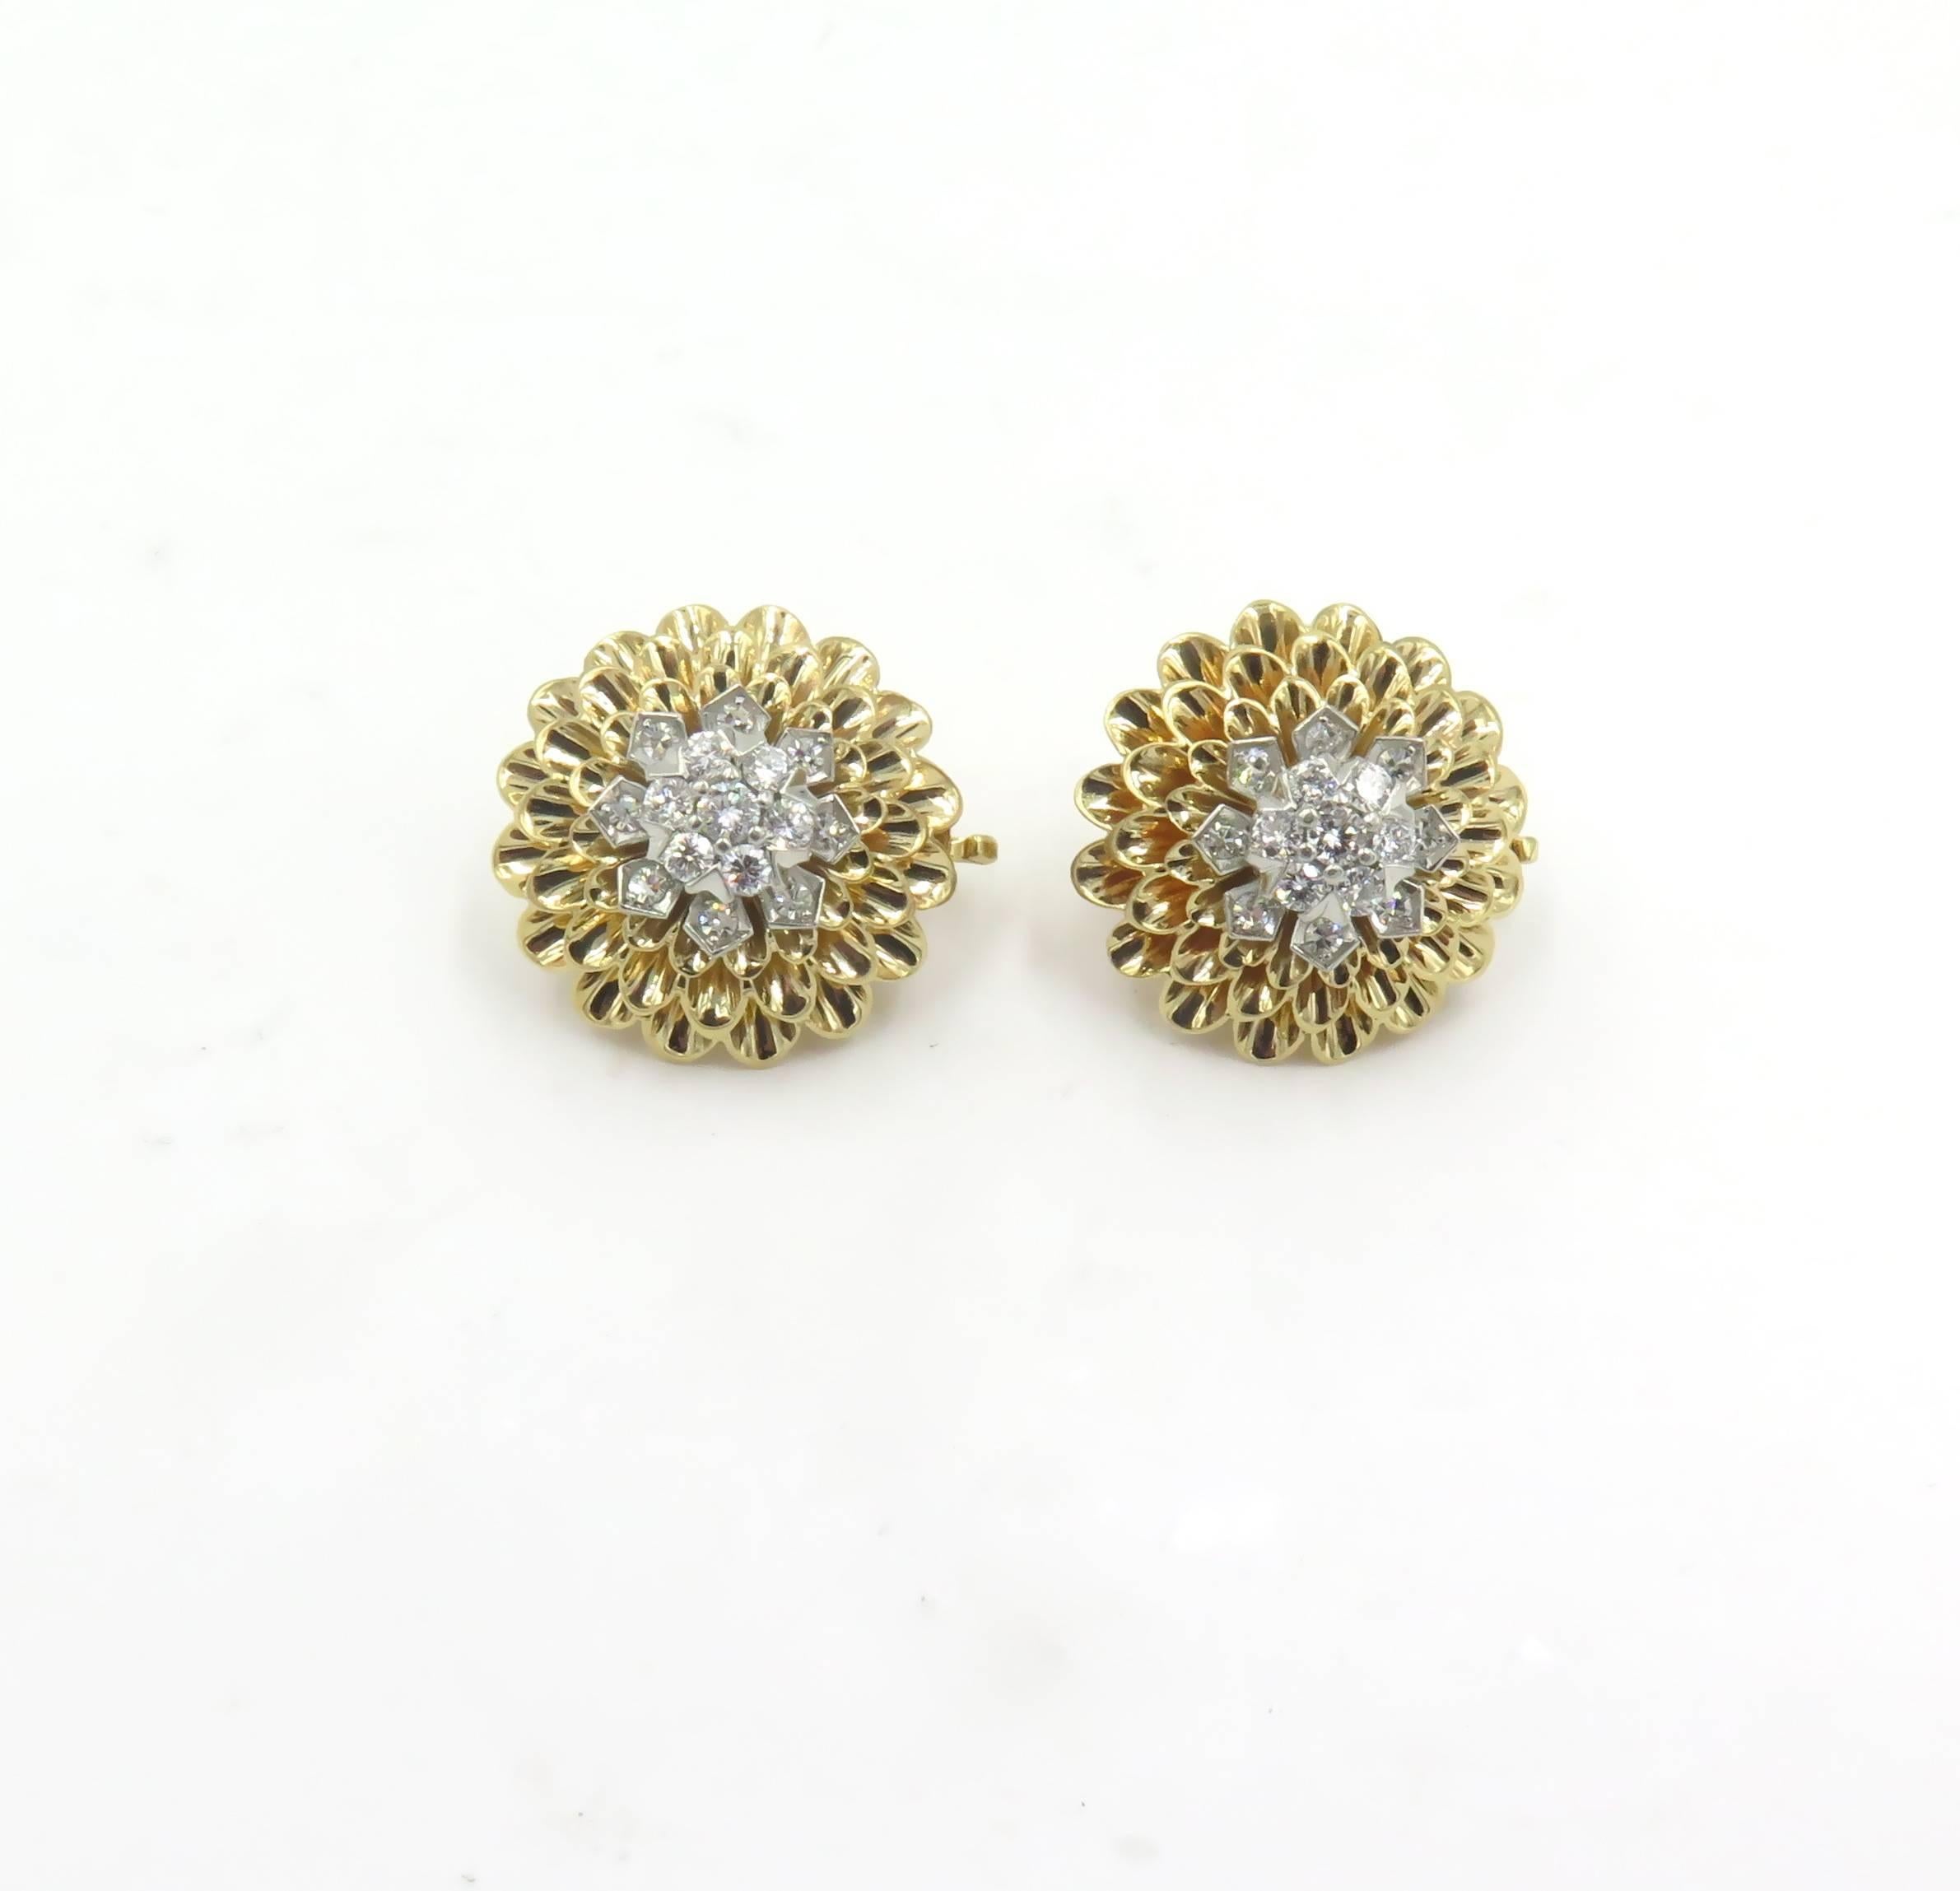 A pair of 14 karat yellow gold and diamond earrings.  Tiffany & Co.  Circa 1950. Each designed as polished gold chrysanthemum, centering a cluster of circular cut diamonds. Thirty (30) diamonds weigh approximately 1.10 carats.  Diameter is